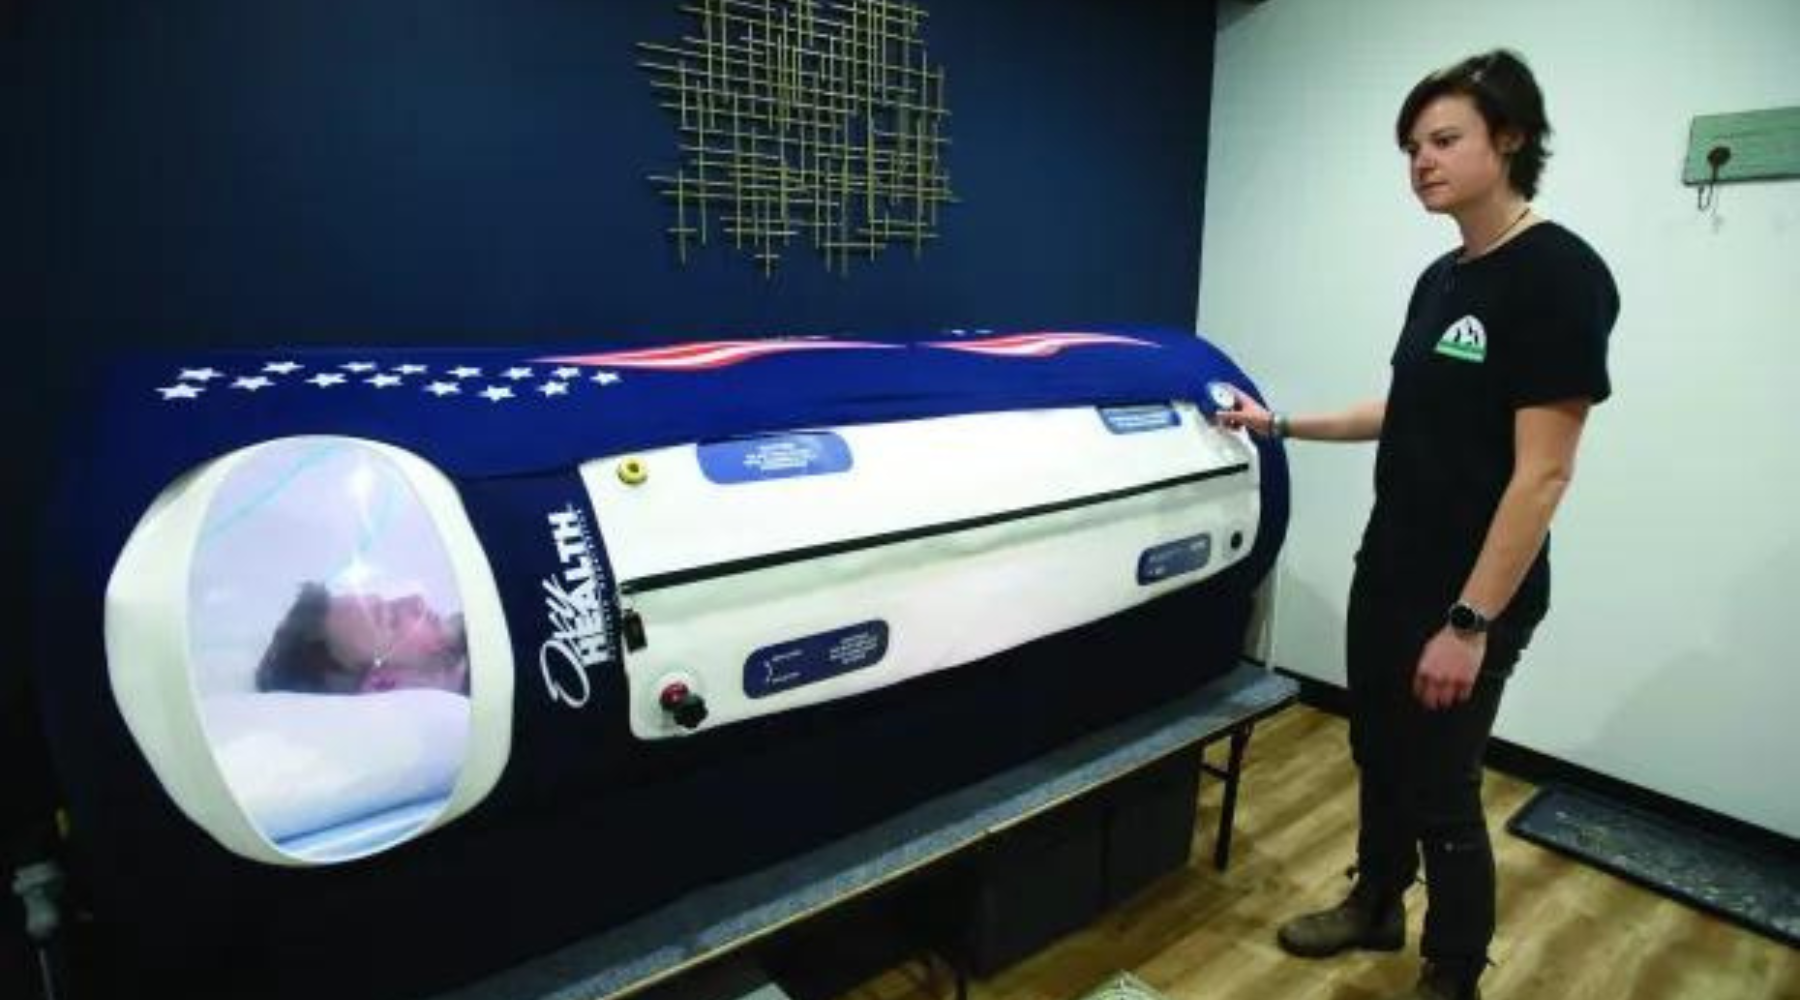 Revolutionising Health: The Rise of Home Hyperbaric Chambers in the UK